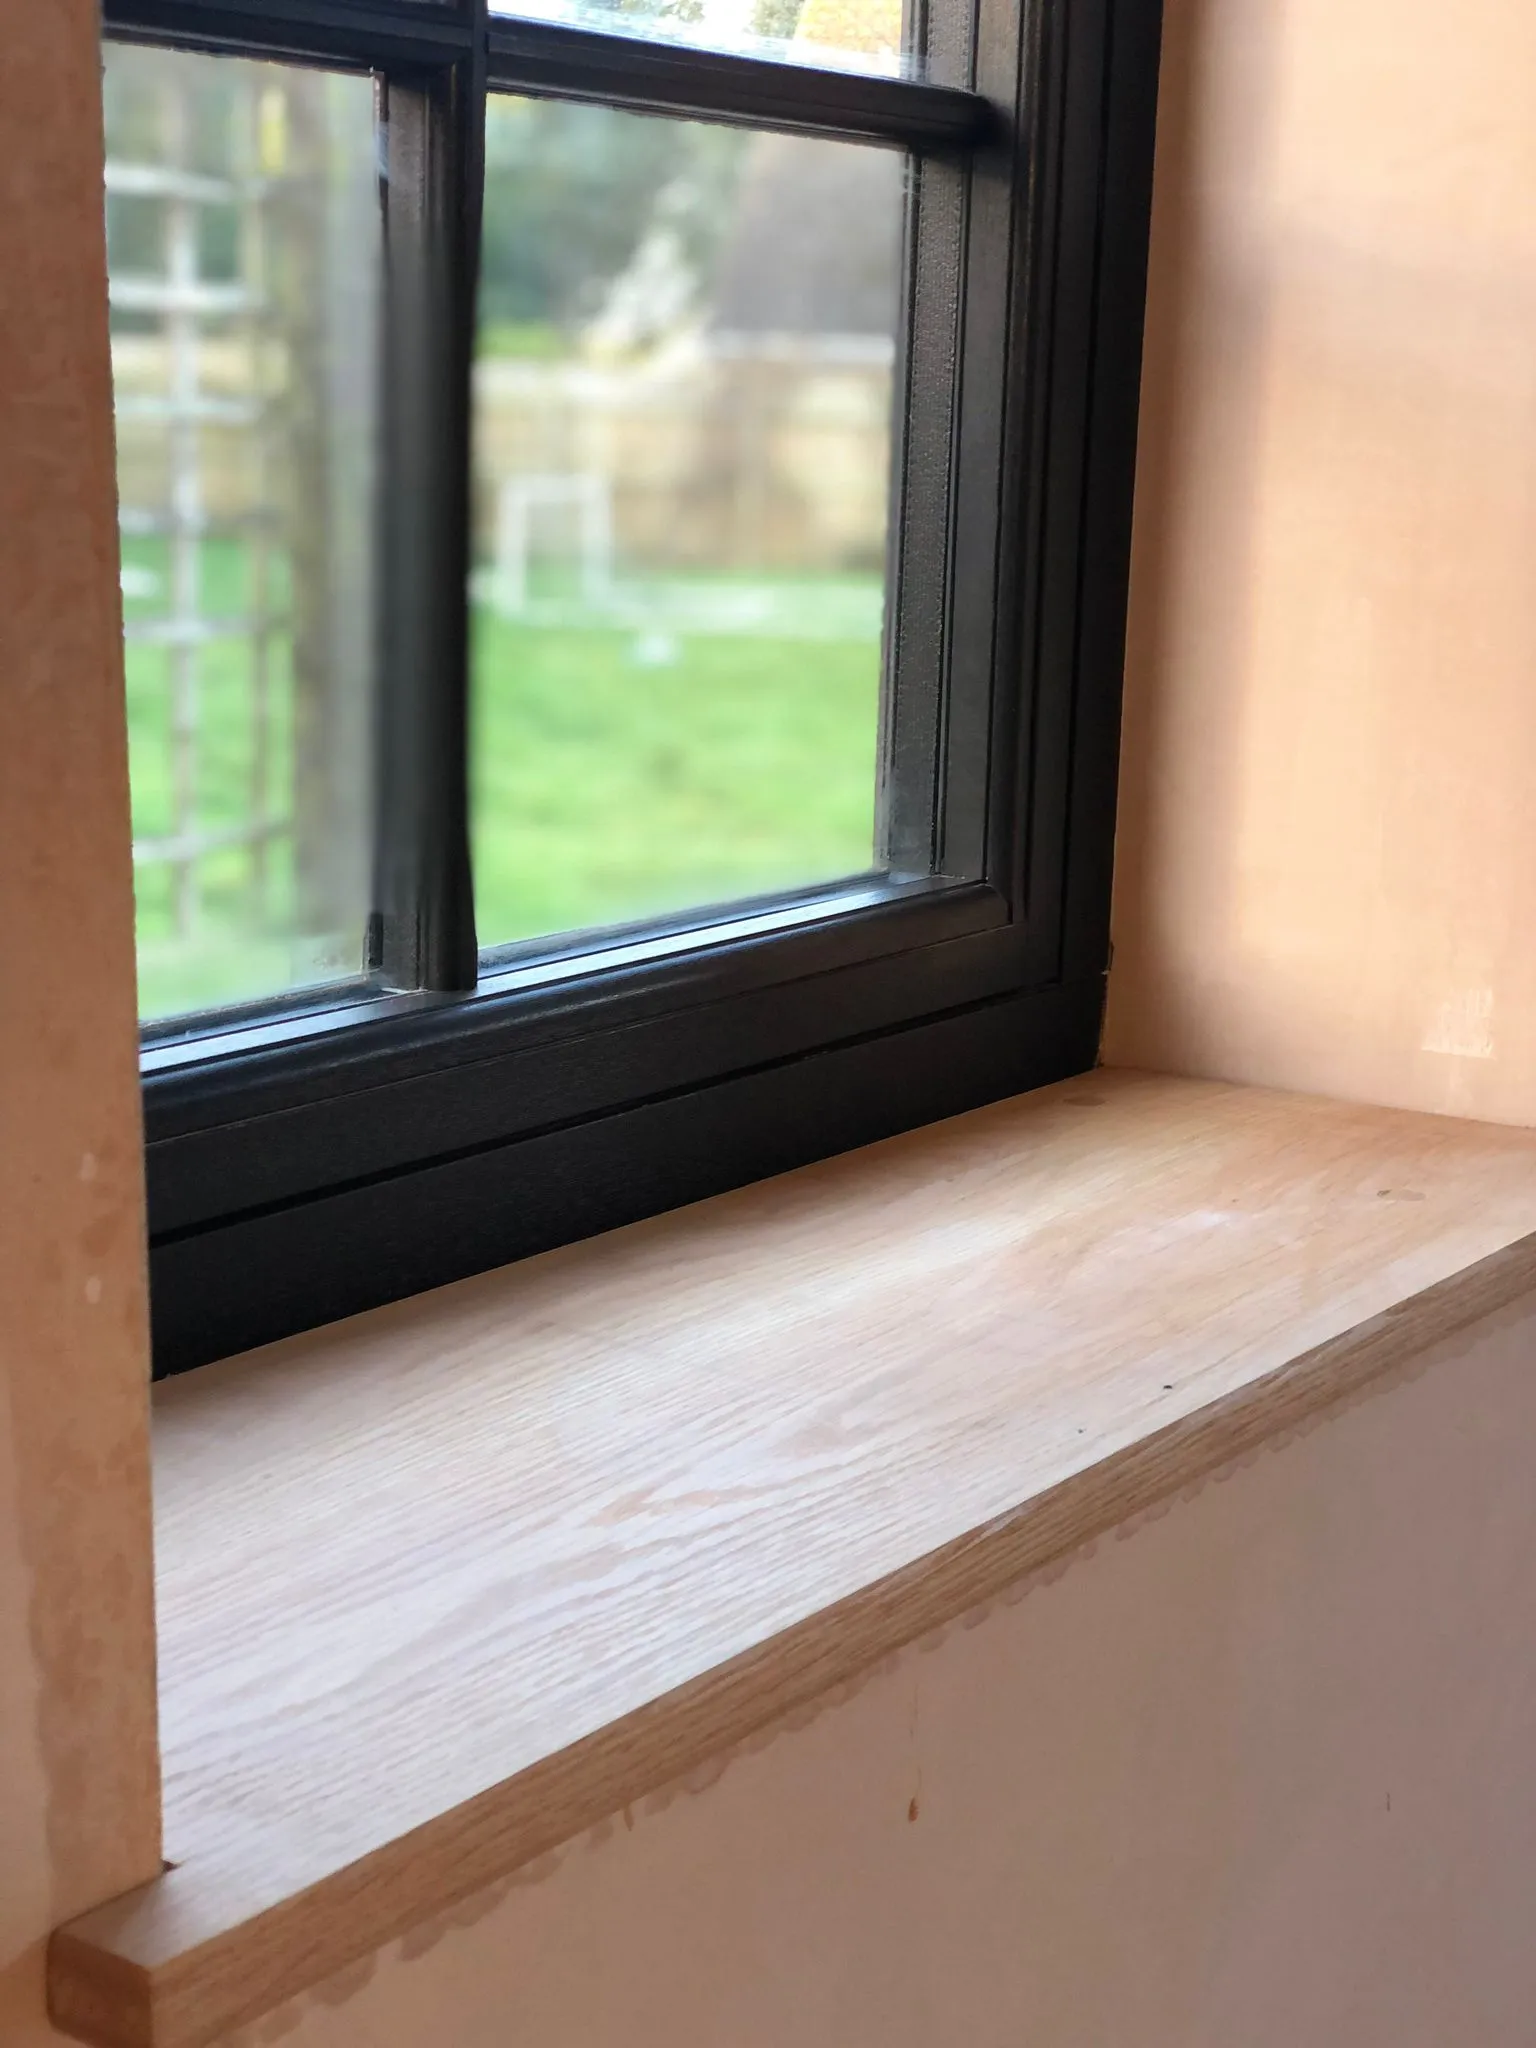 a window sill with a window pane in the background